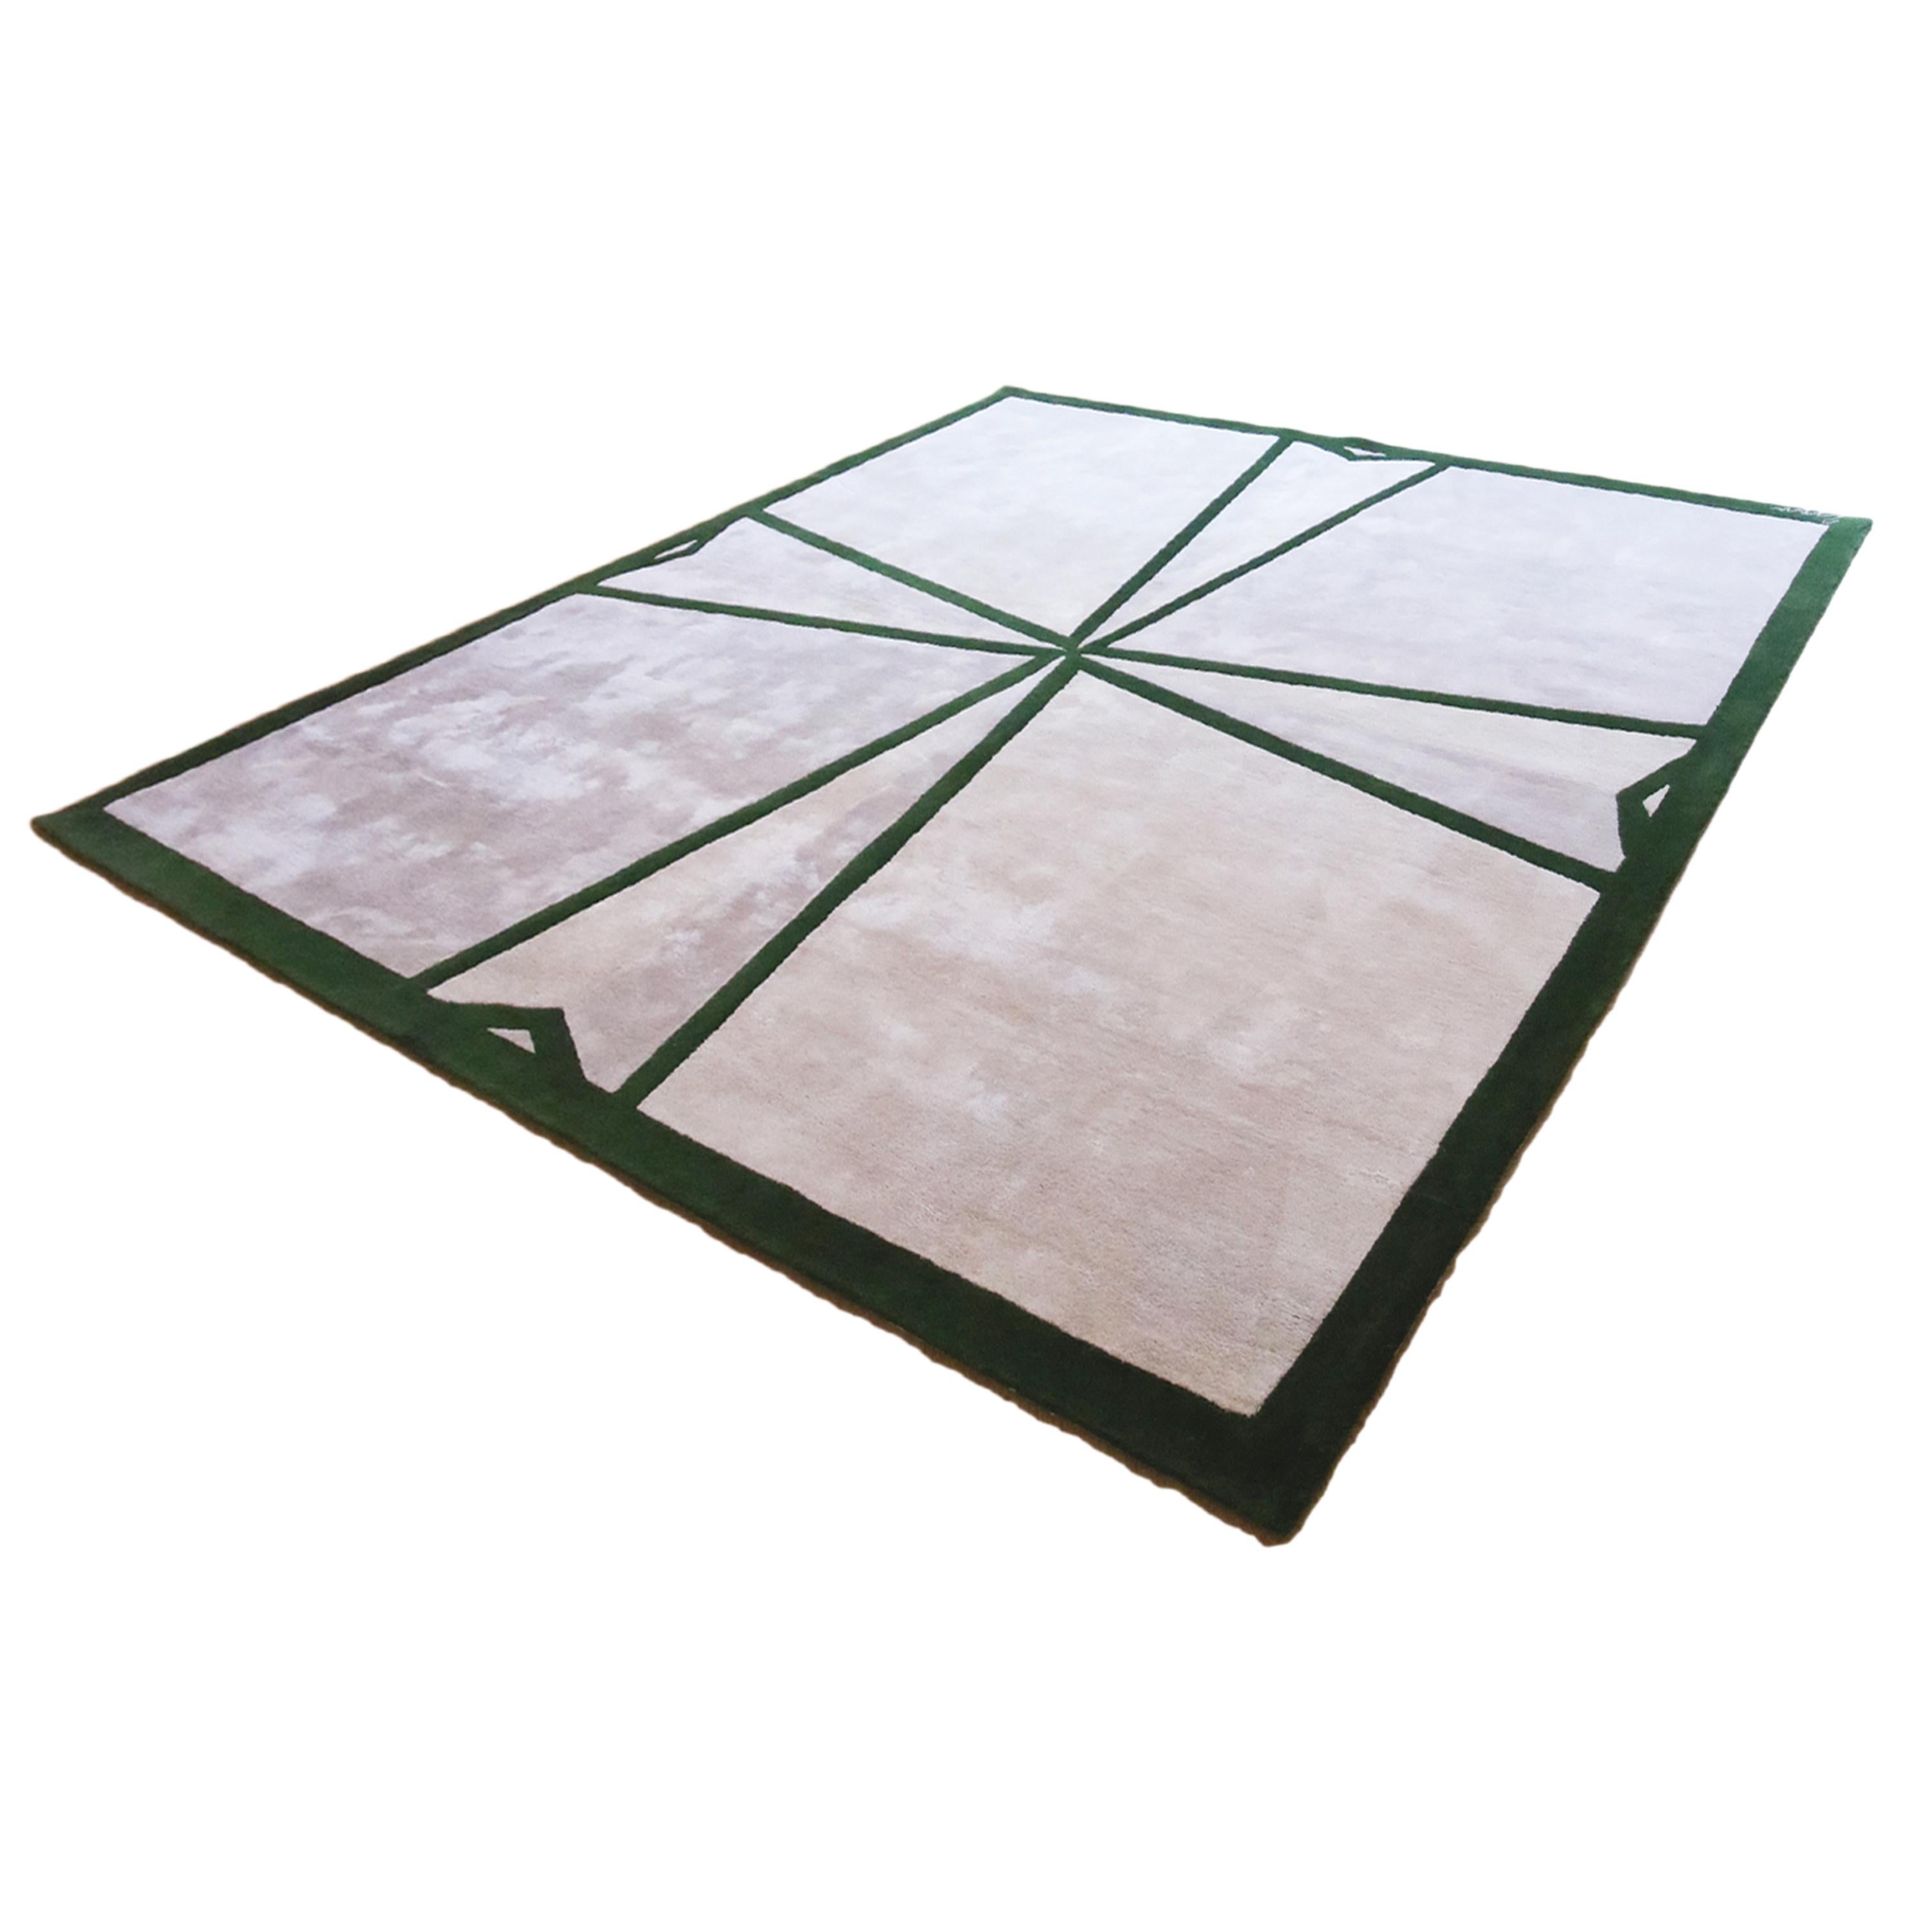 Square Rug Green And Ivory, Contemporary Design, Hand-Tufted In New Condition For Sale In London, GB